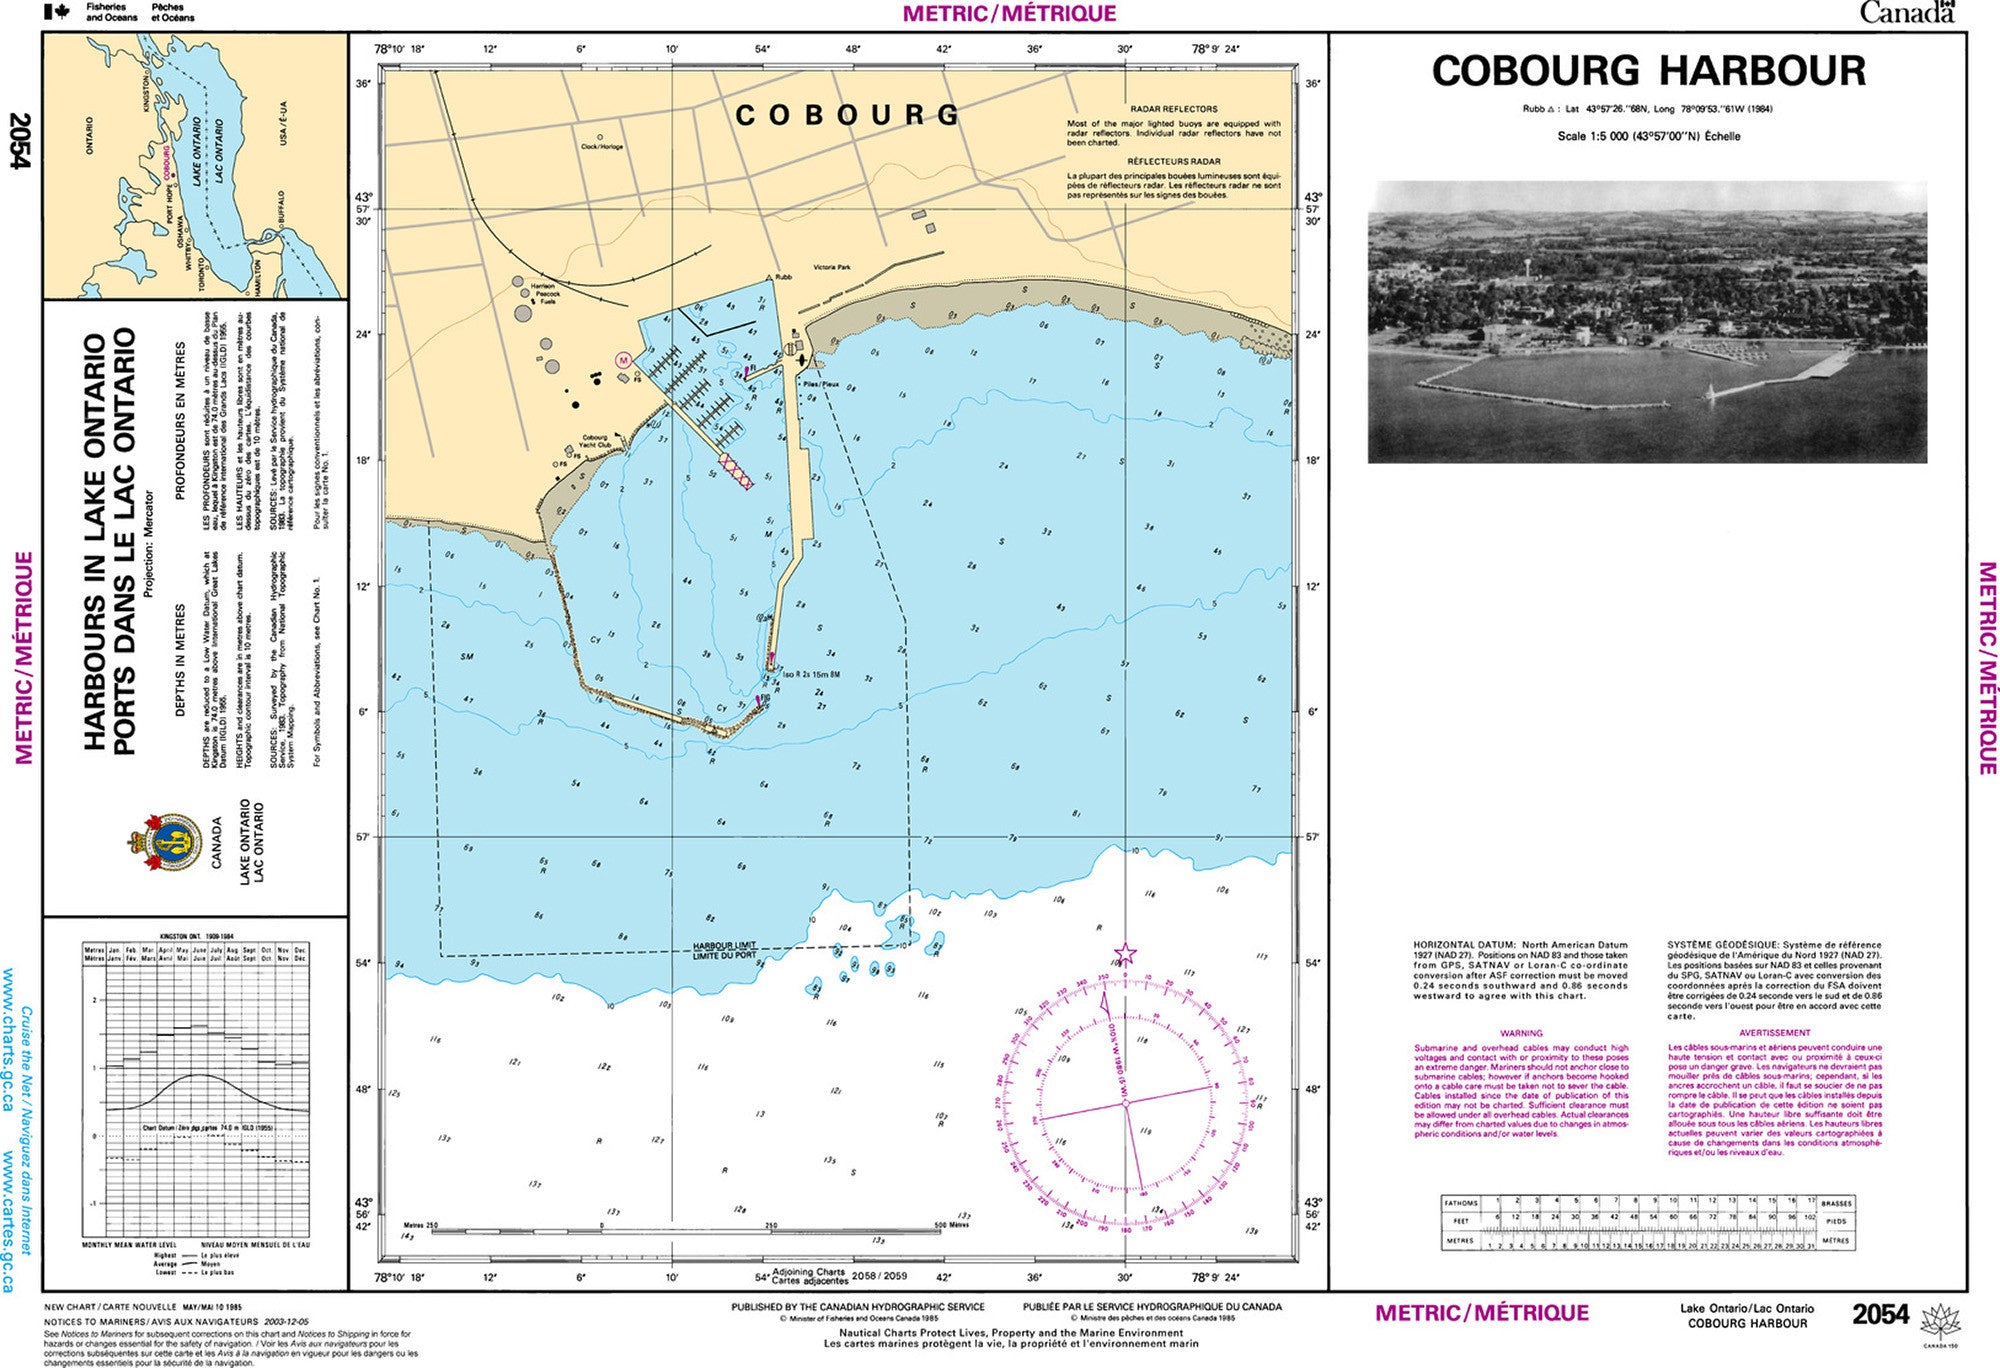 Canadian Hydrographic Service Nautical Chart CHS2054: Cobourg Harbour